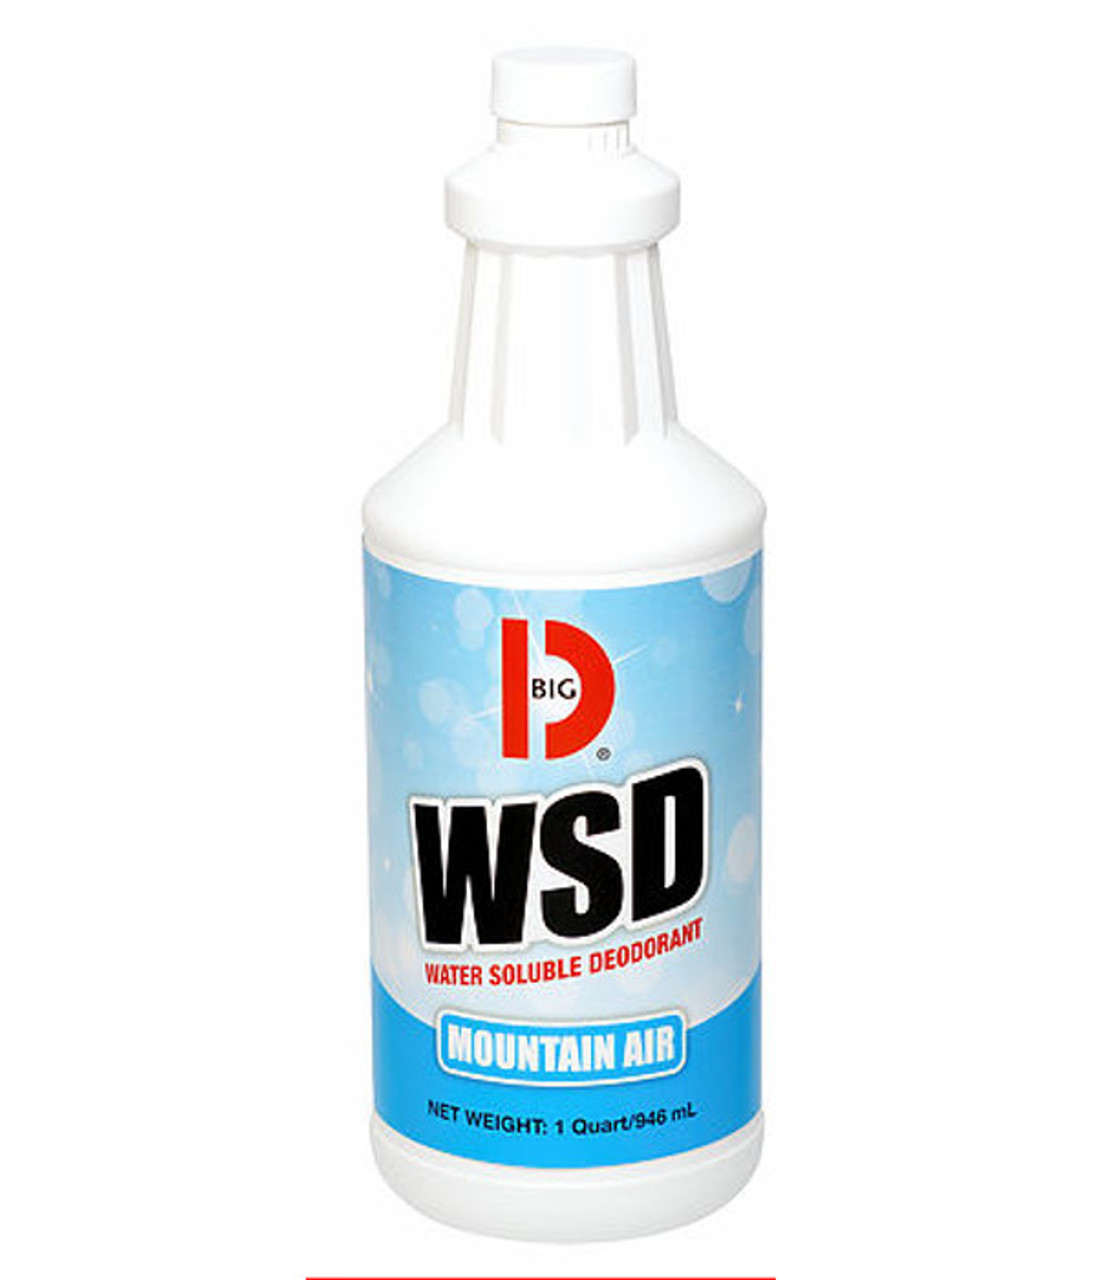 Big D Water Soluble Deodorant Concentrate is Safe to use on Multiple Surfaces and Fabrics.
